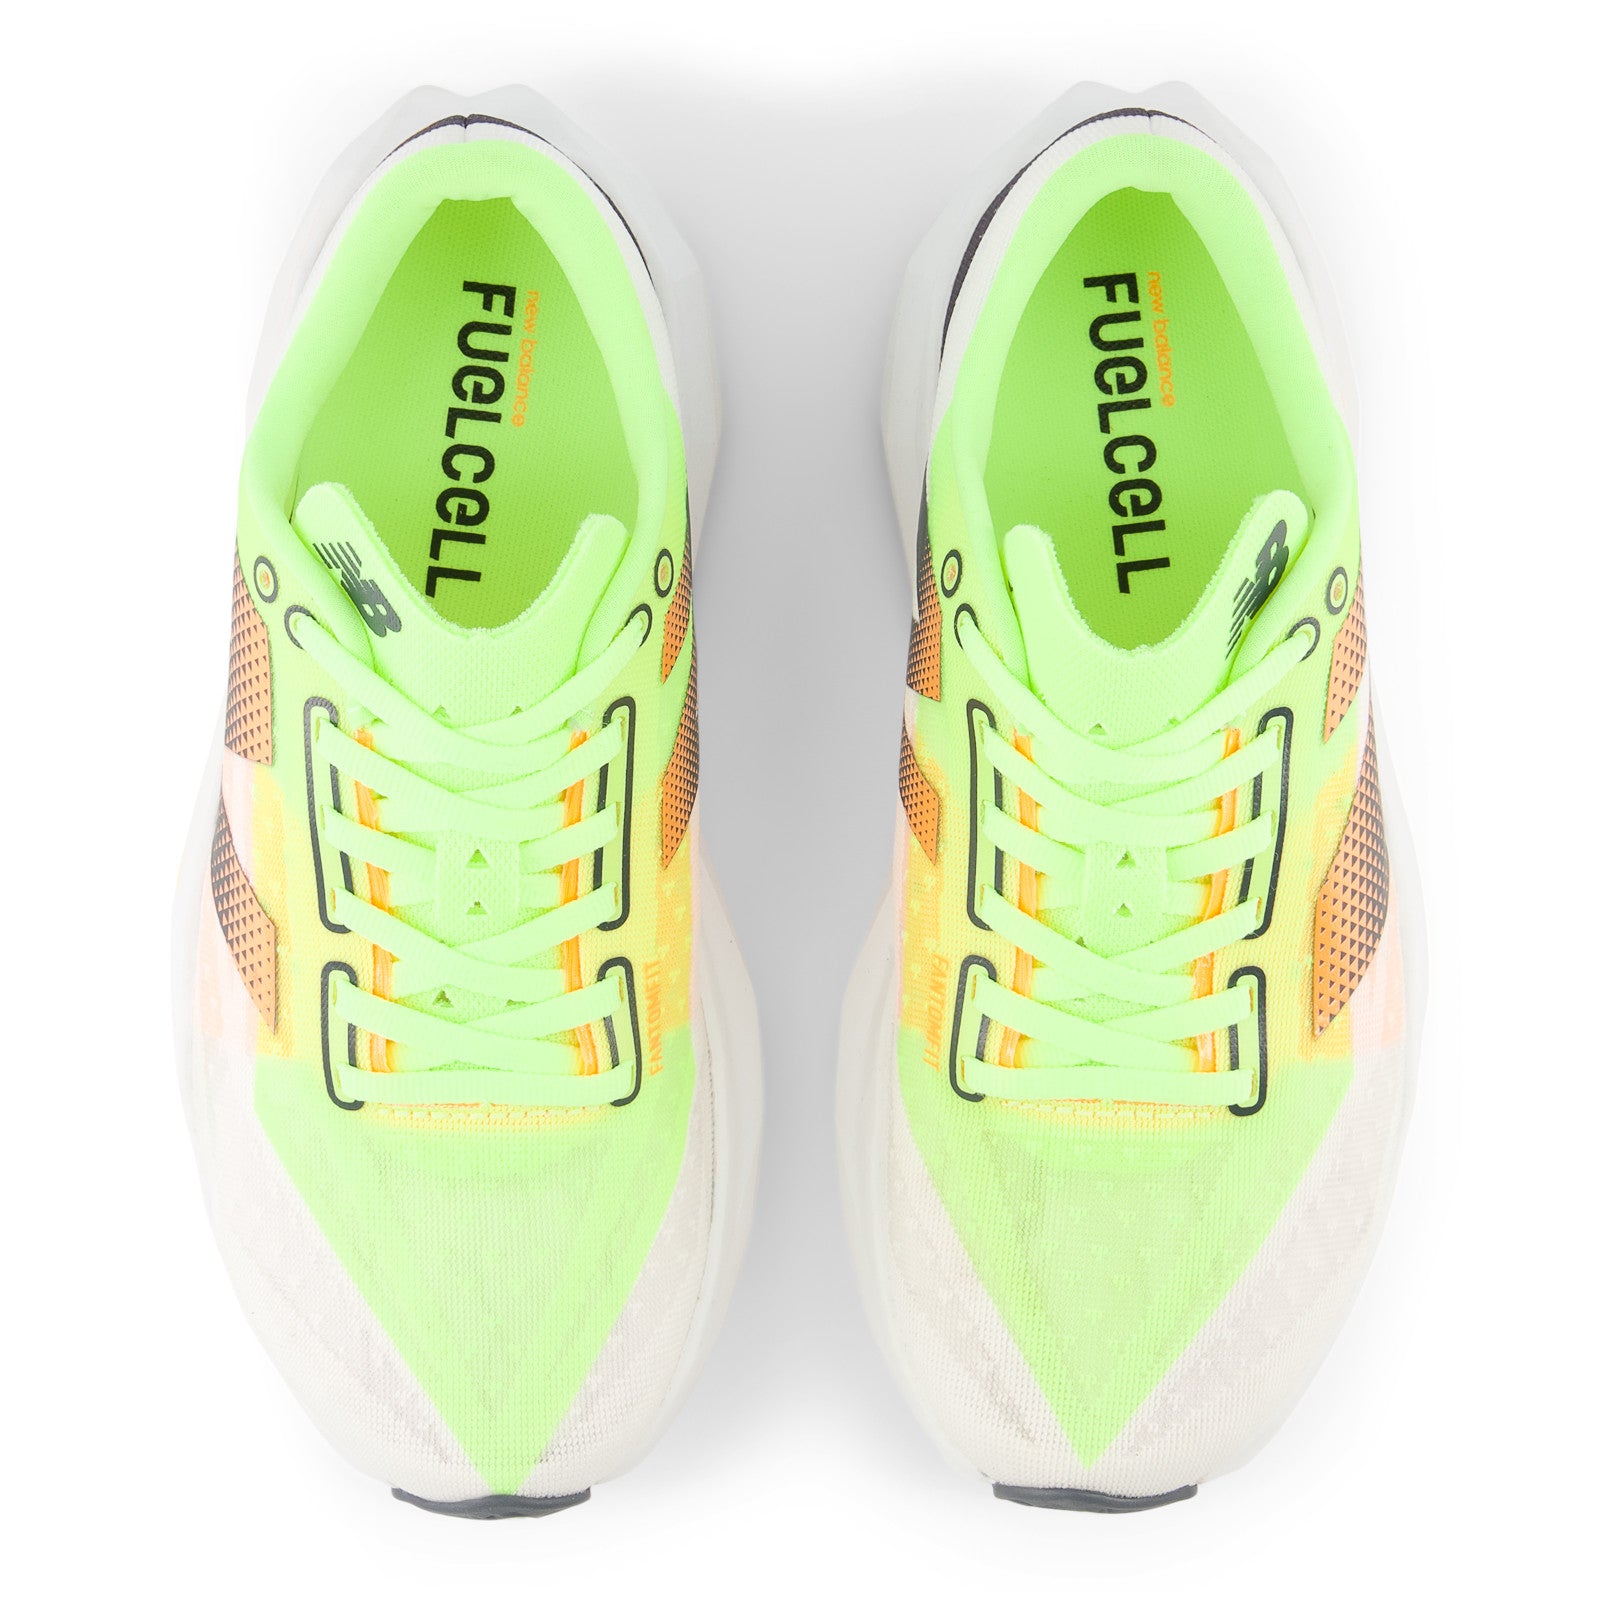 NEW BALANCE MEN'S FUELCELL REBEL V4 - D - LL4 WHITE/BLEACHED LIME GLO 